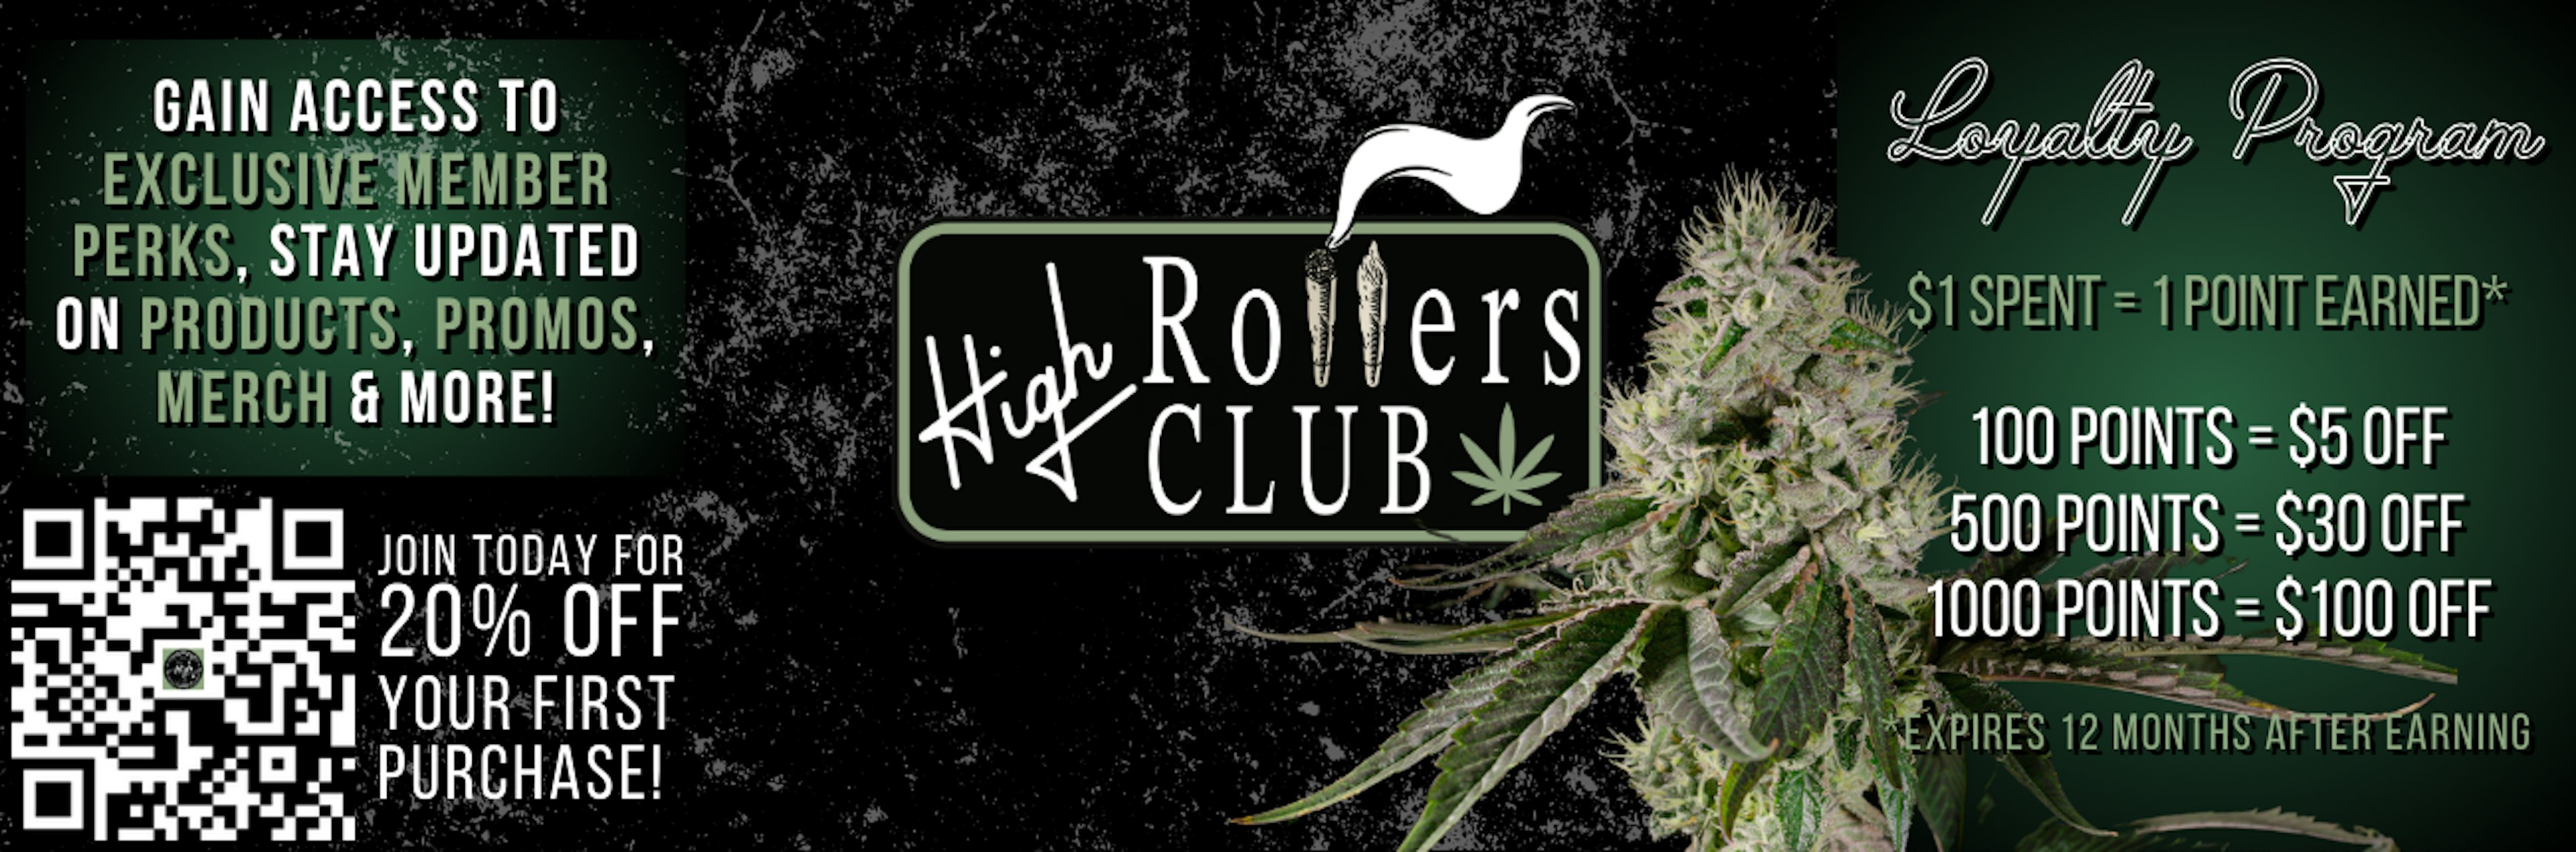 high rollers club - updated